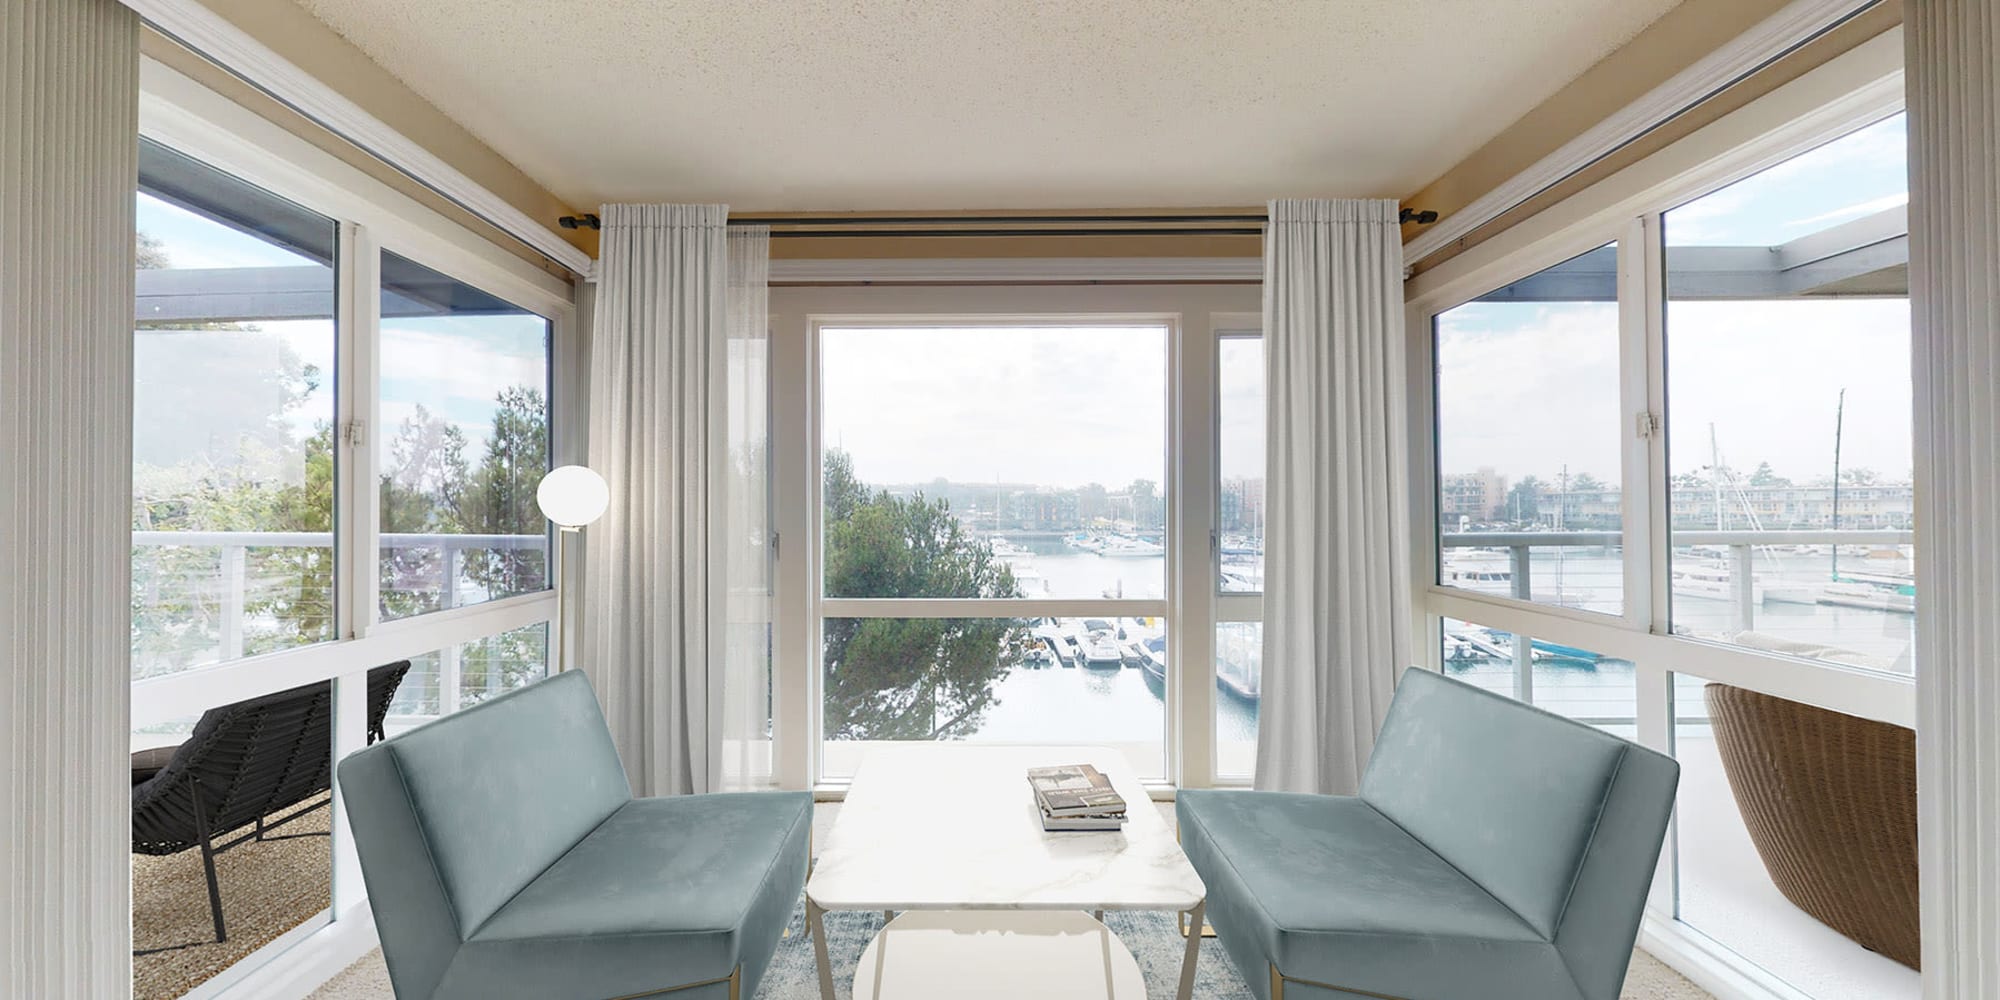 Stylish seating area with expansive waterfront view in a spacouis apartment home at The Tides at Marina Harbor in Marina del Rey, California